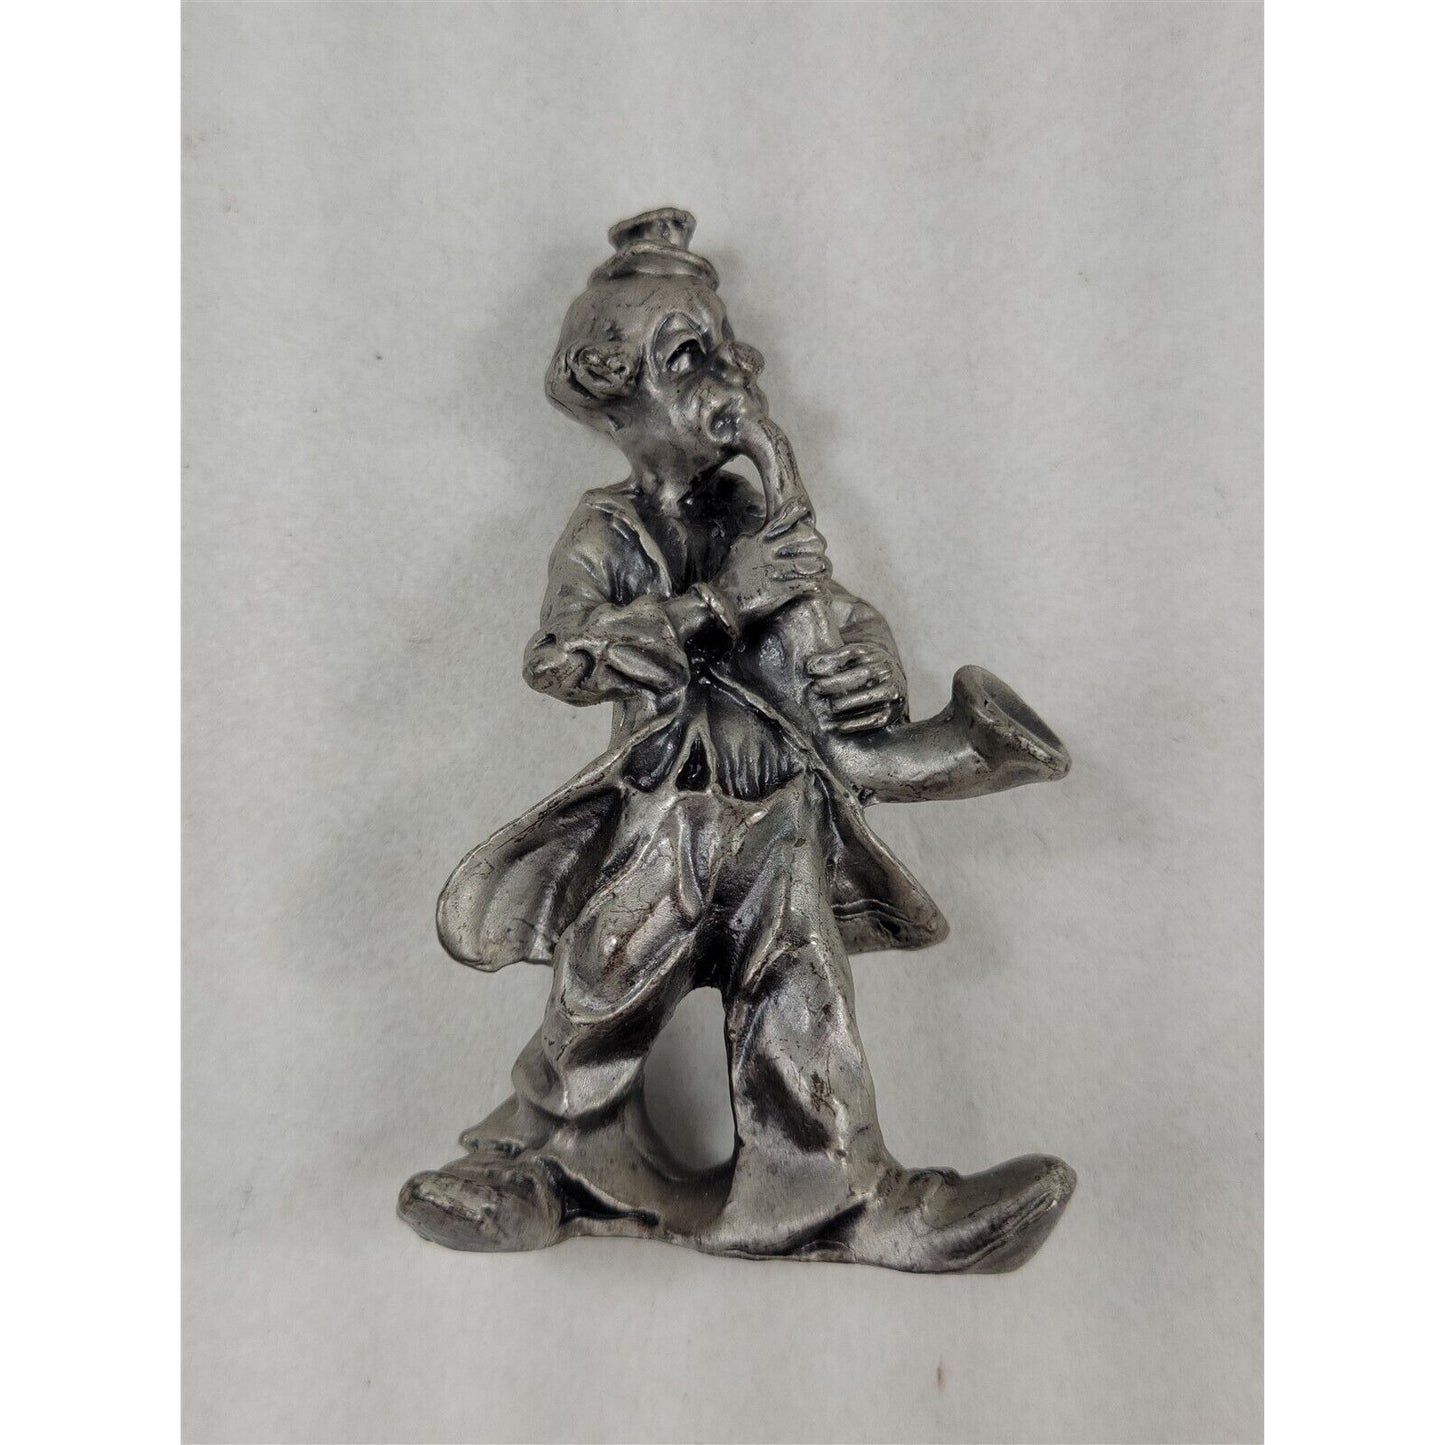 Vintage Solid Pewter Hobo Musical Clown Playing a Saxophone Instrument